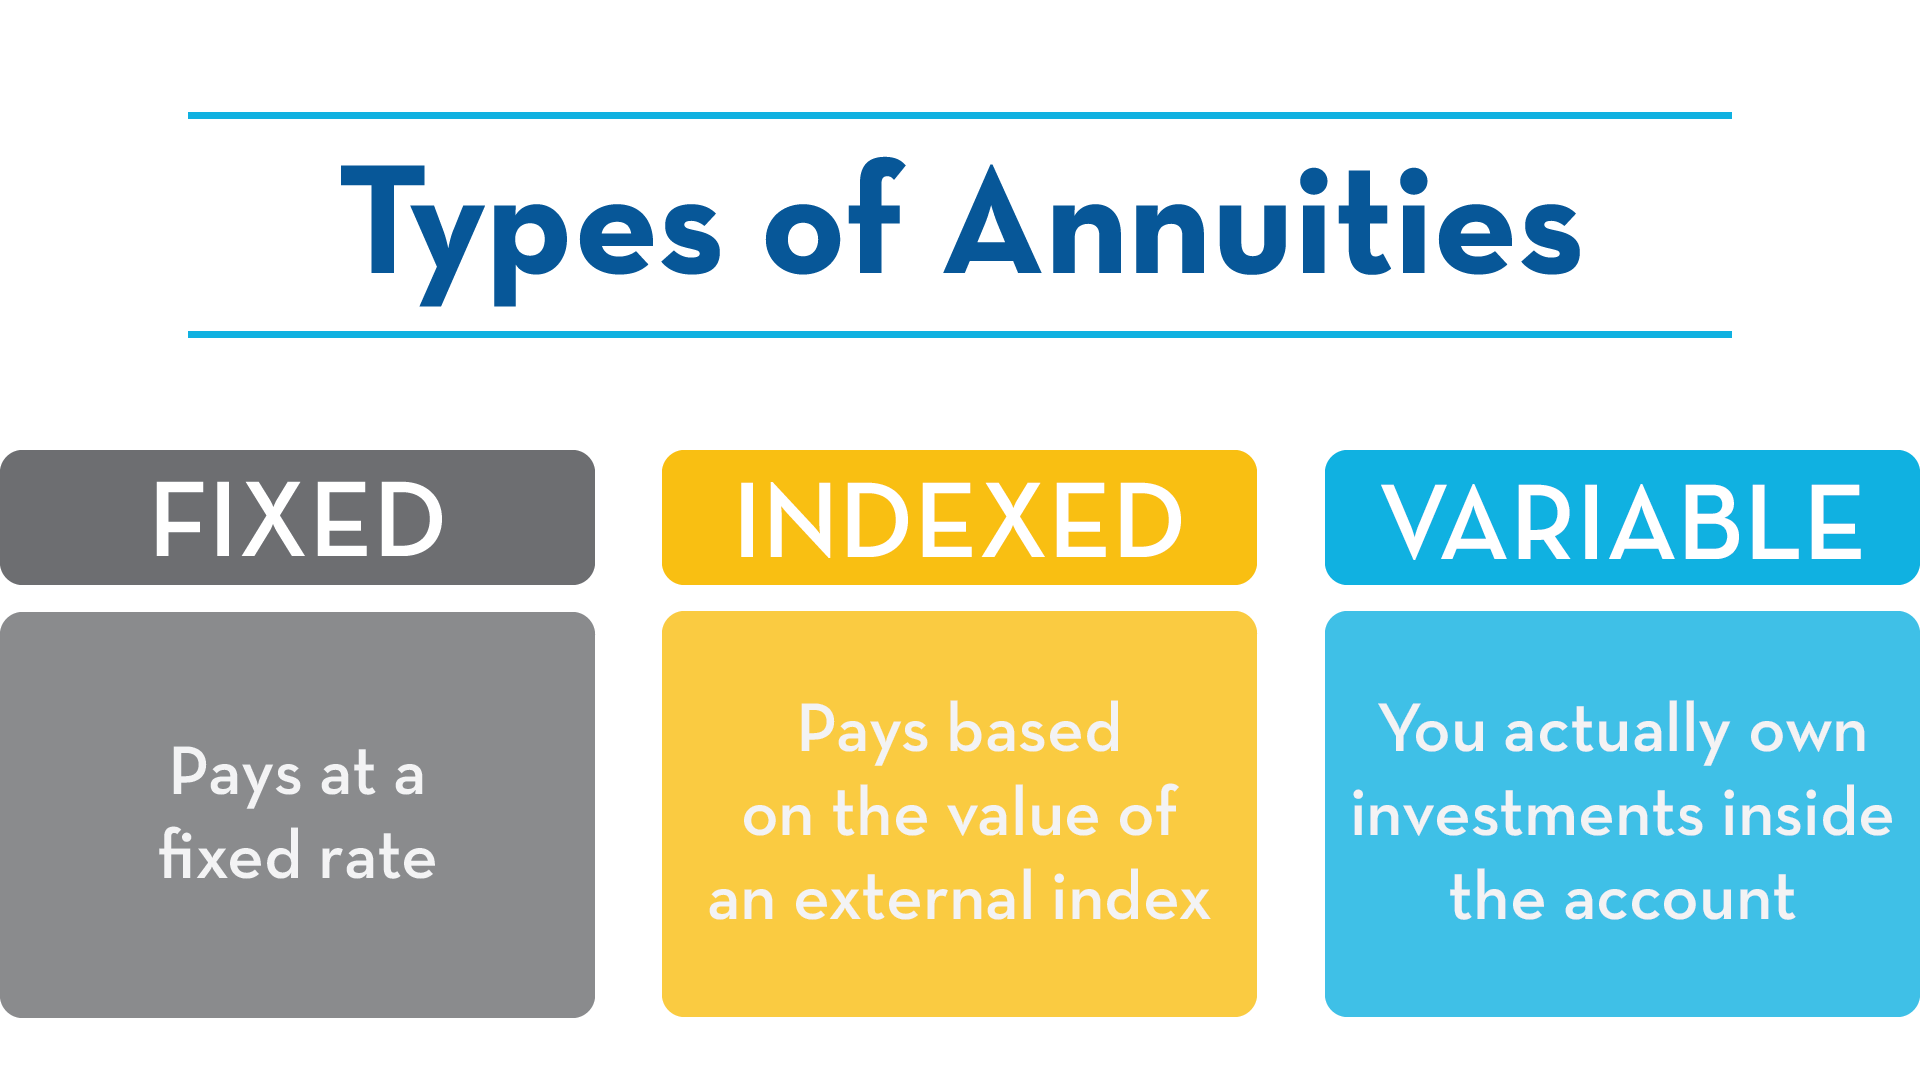 image-813644-Graphic_Types-of-Annuities-08-e4da3.png